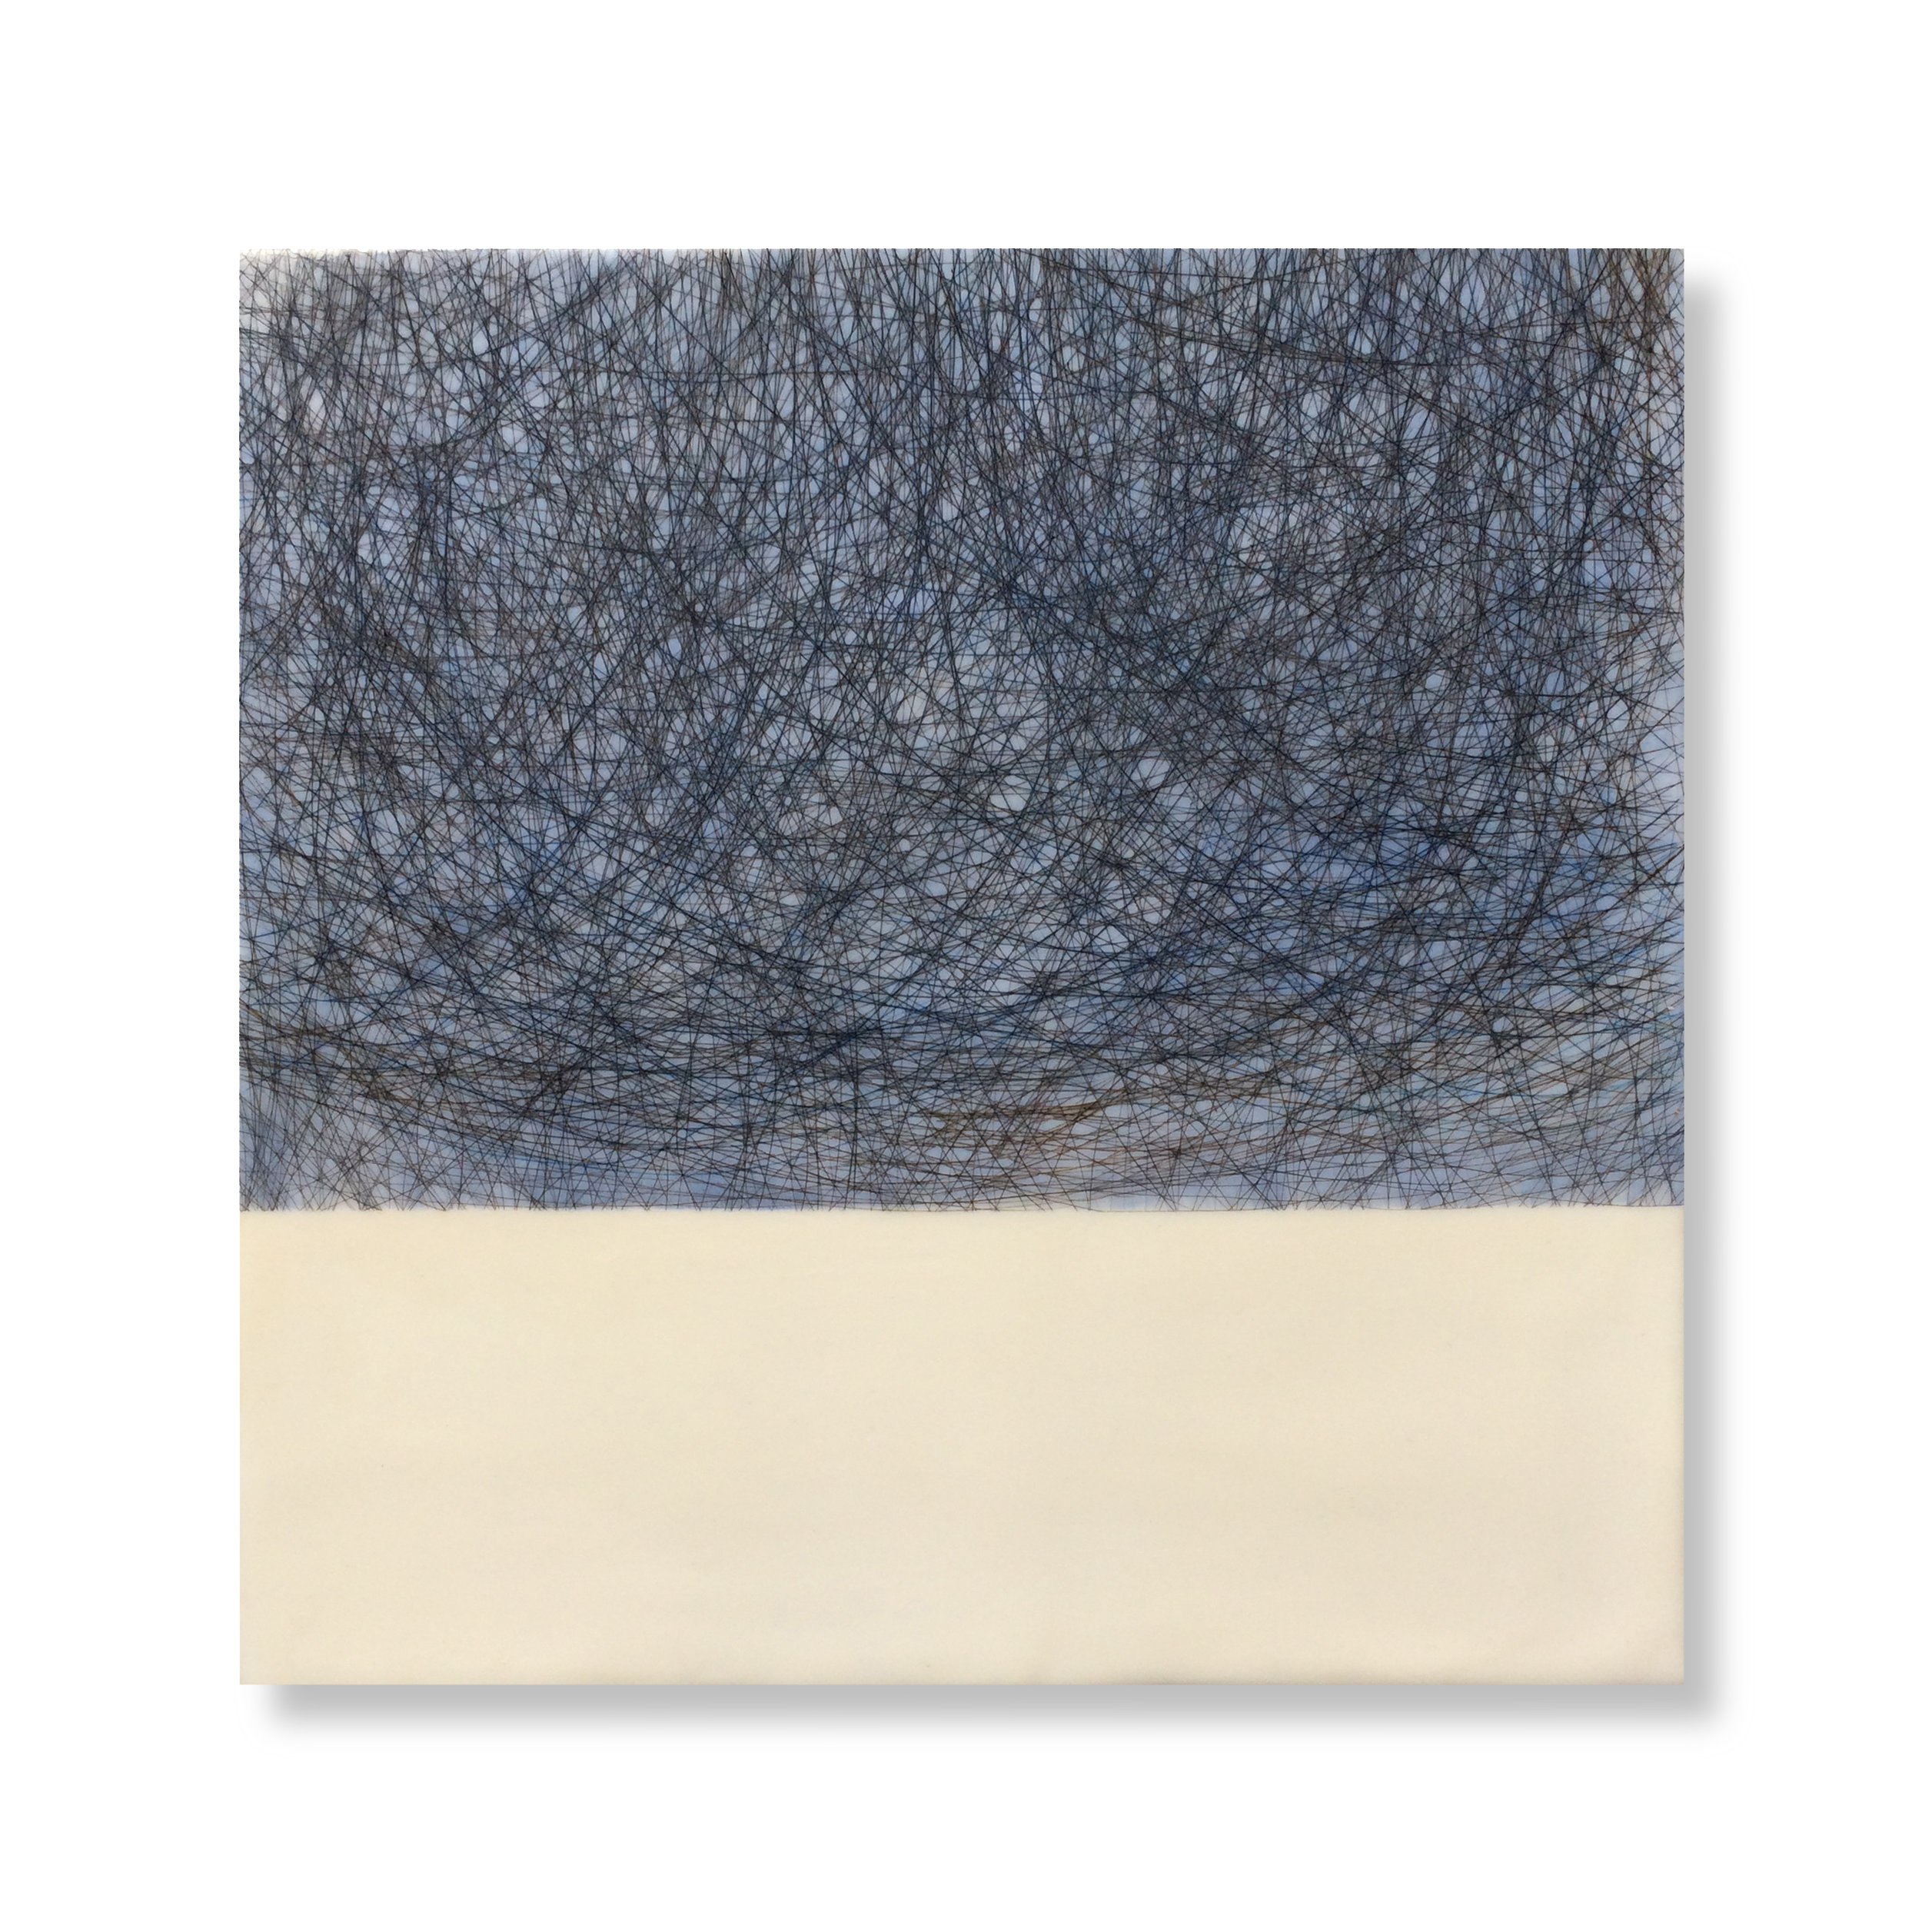  Threads Test, 2015 (sold) Encaustic, Oil 12 x 12&nbsp;x 1 inches on panel  